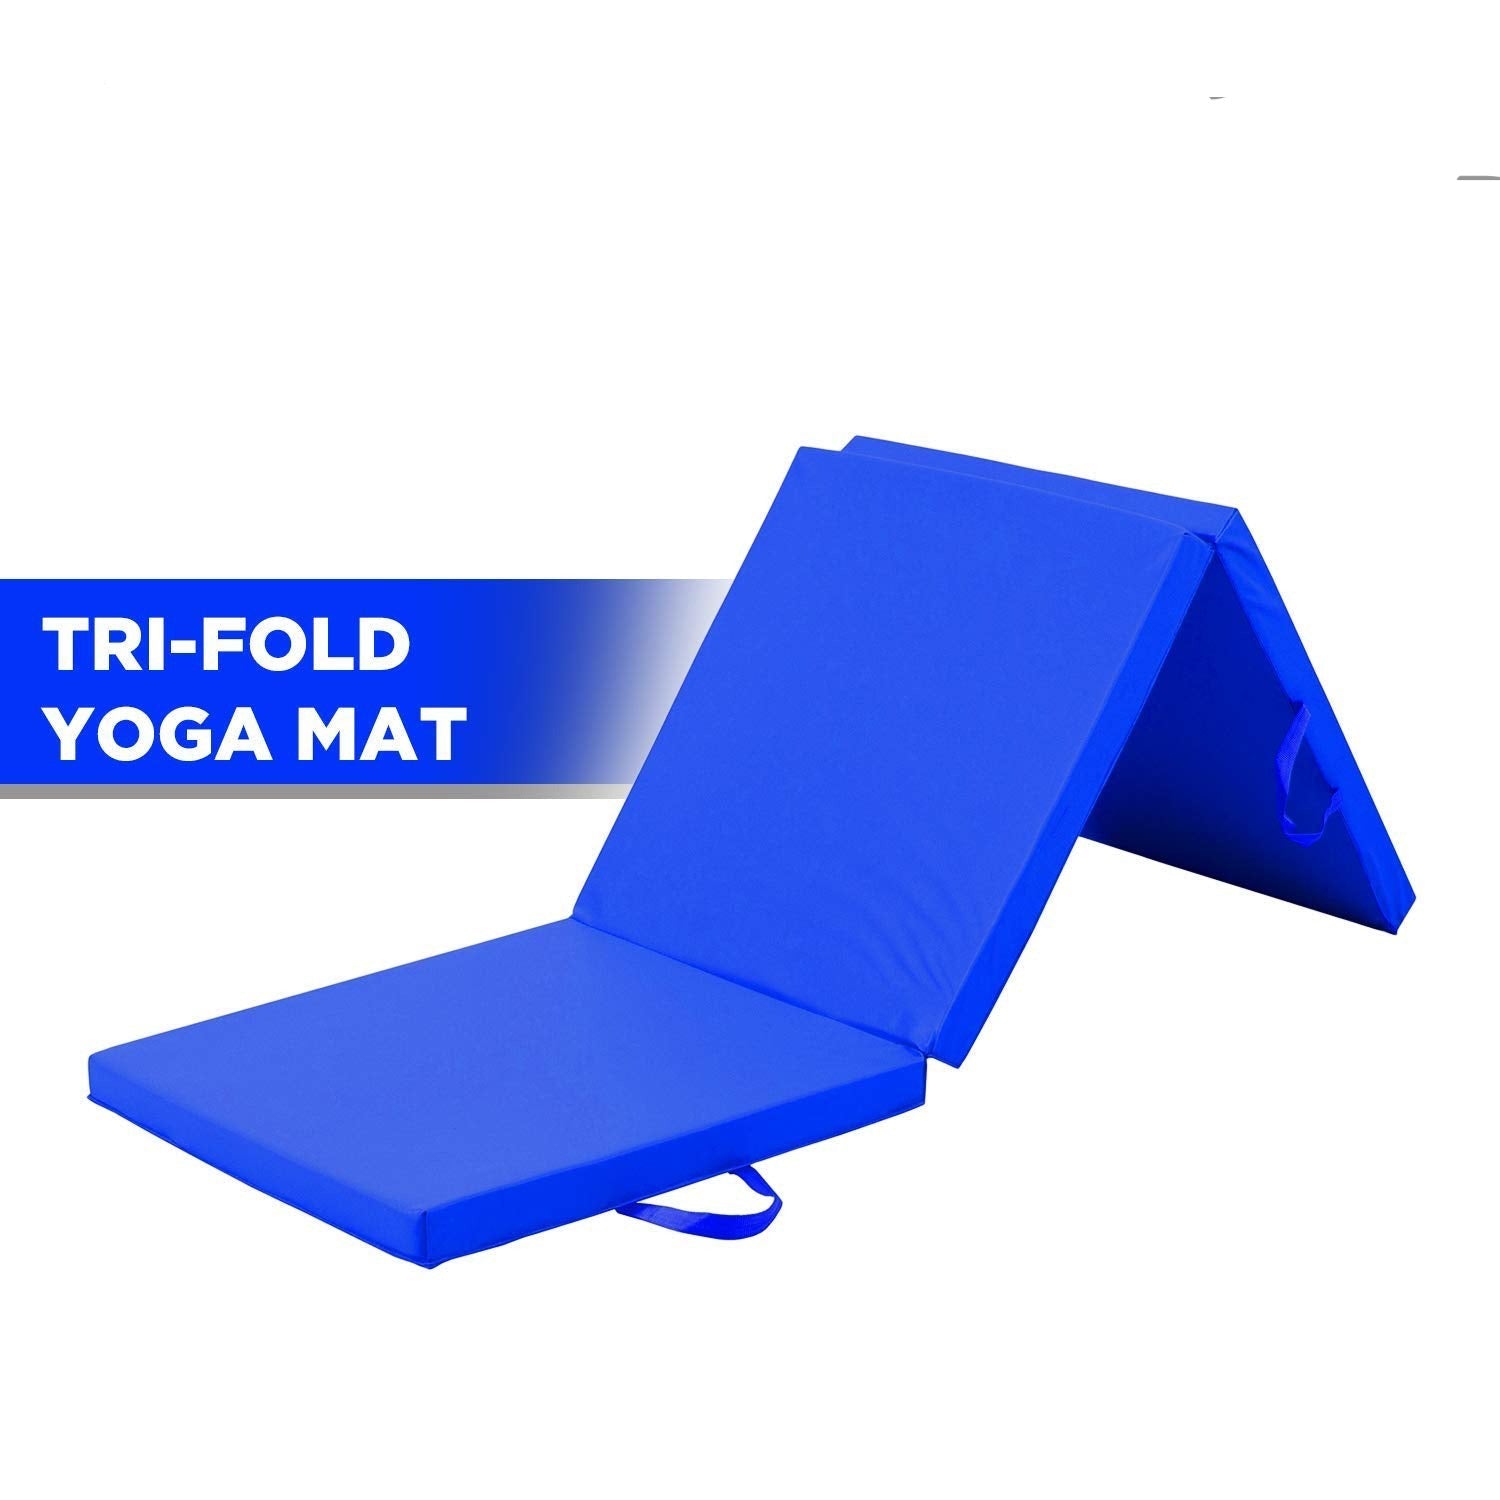 Yoga Bliss with MaxStrength 2 Padded Tri-Folding Mat - Your